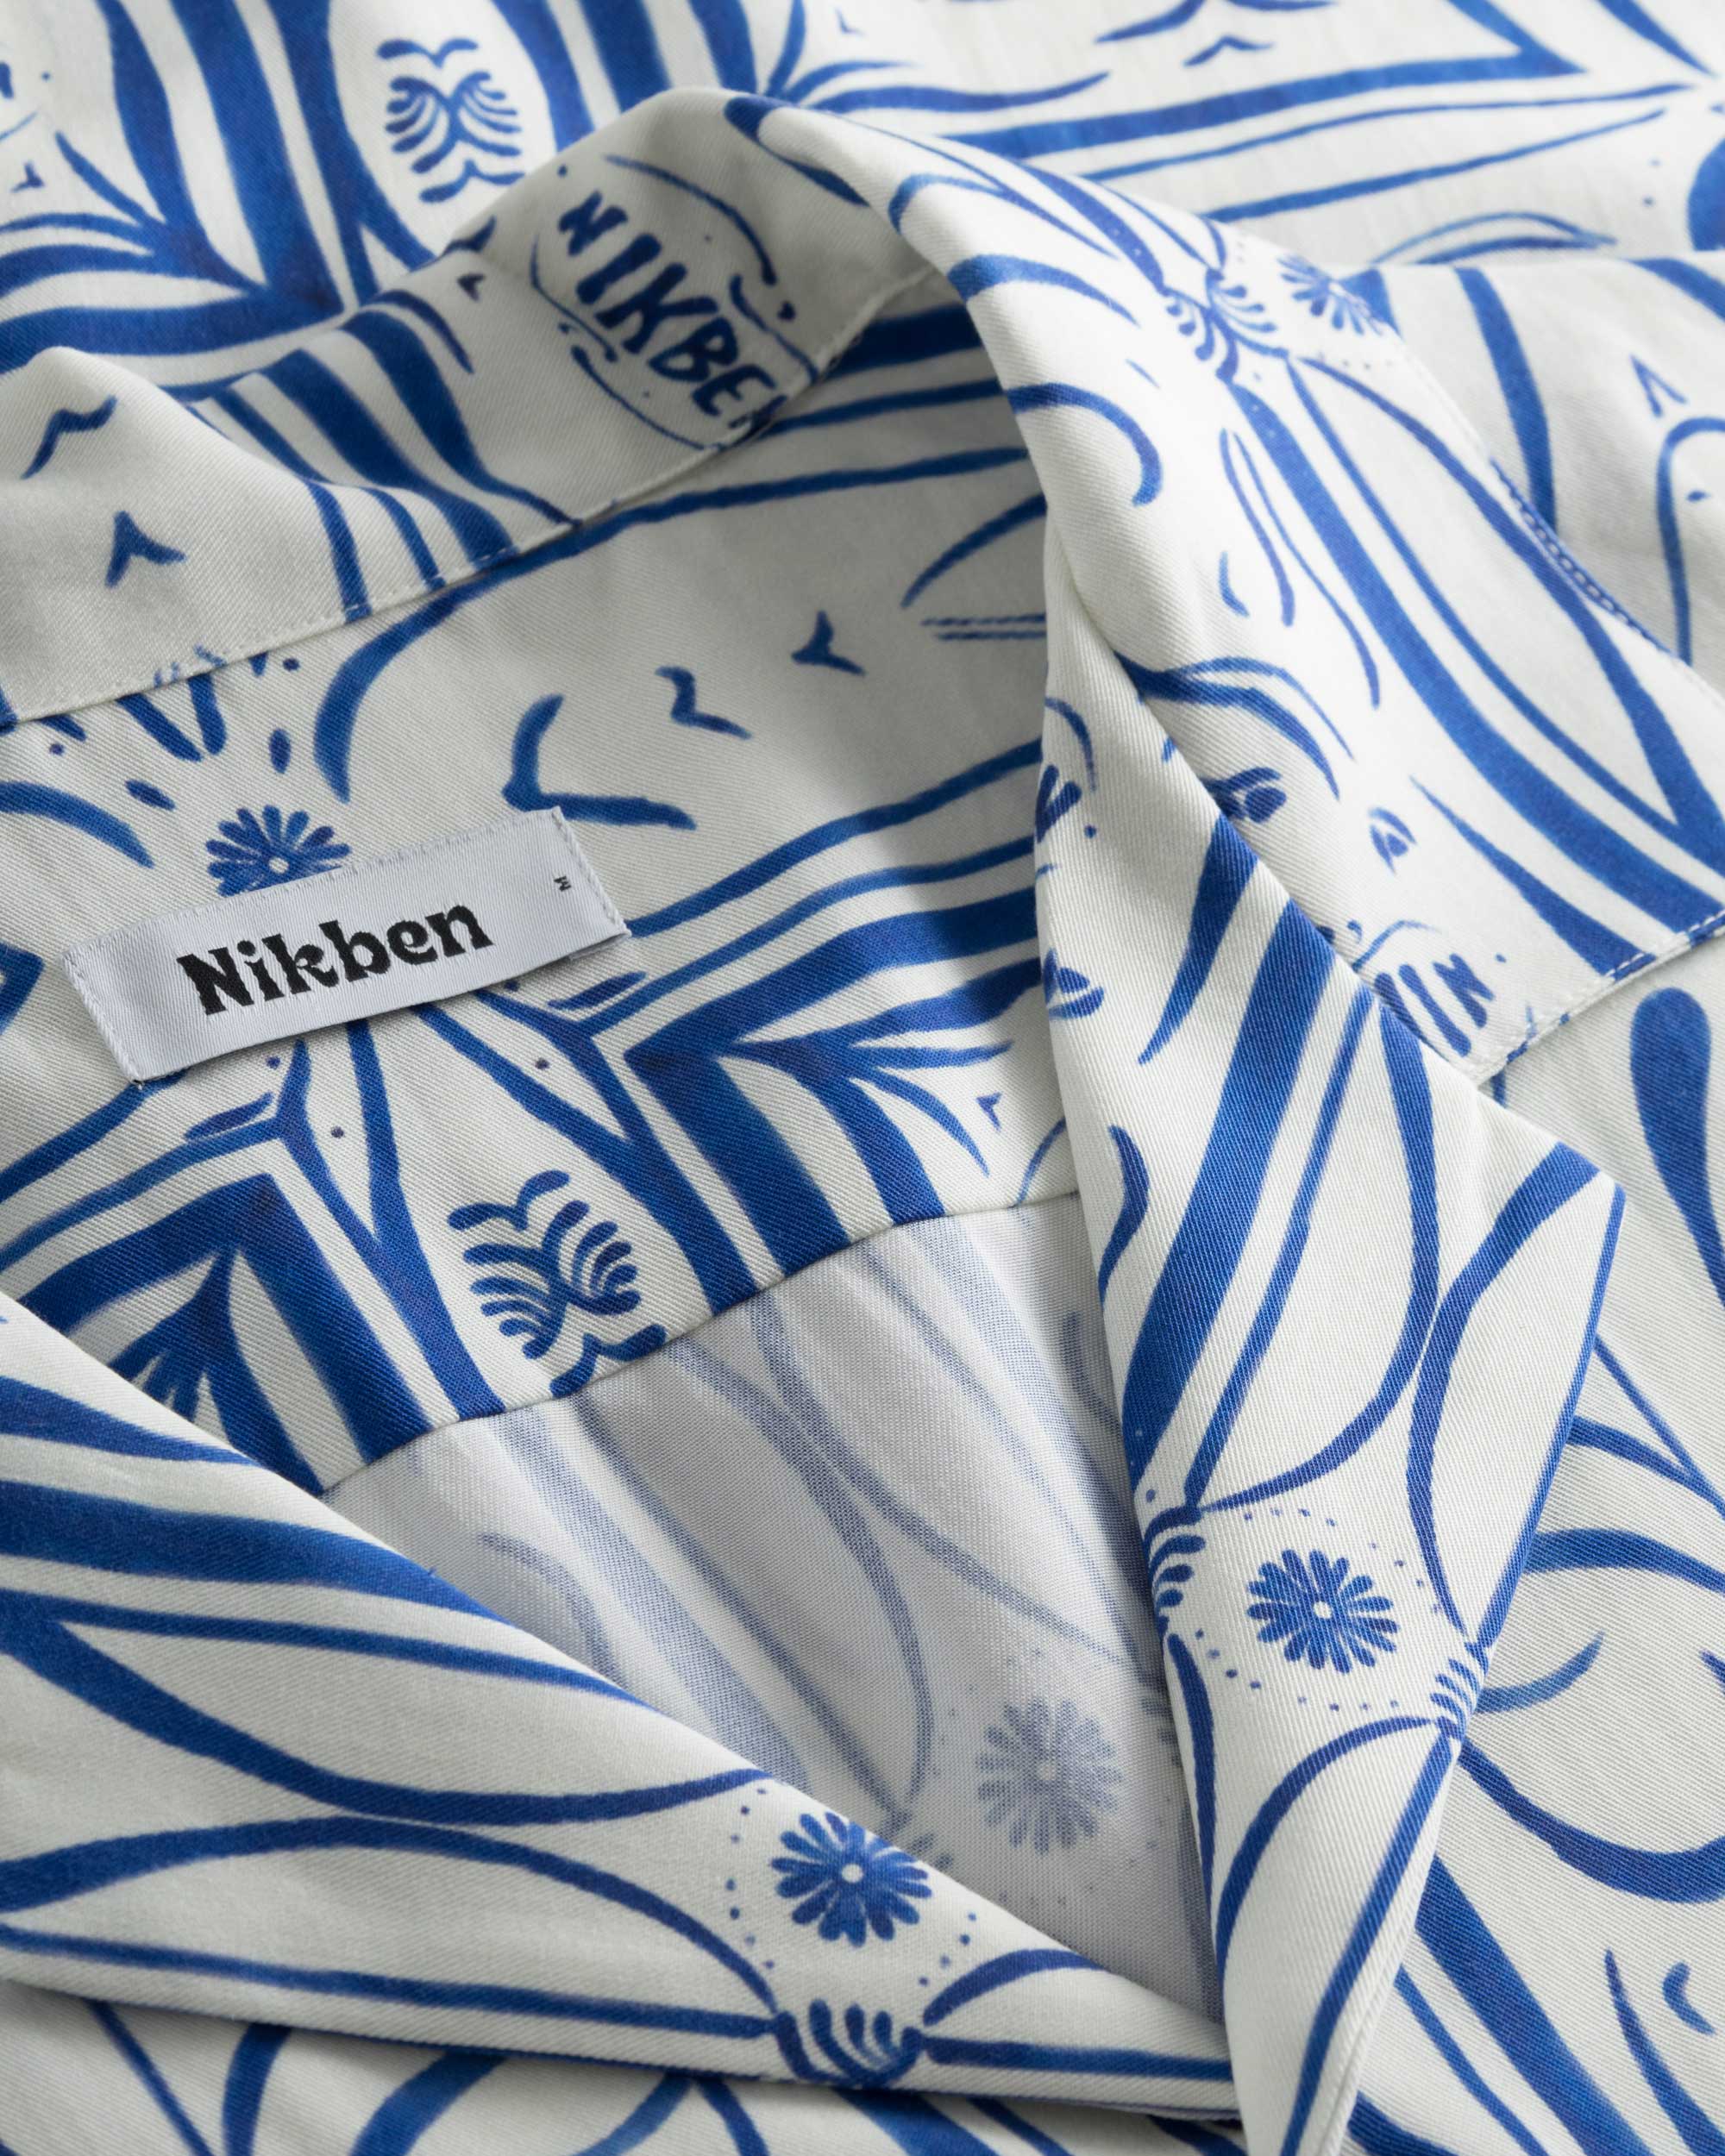 Close-up of the open collar on a white short-sleeved vacation shirt with blue graphic pattern